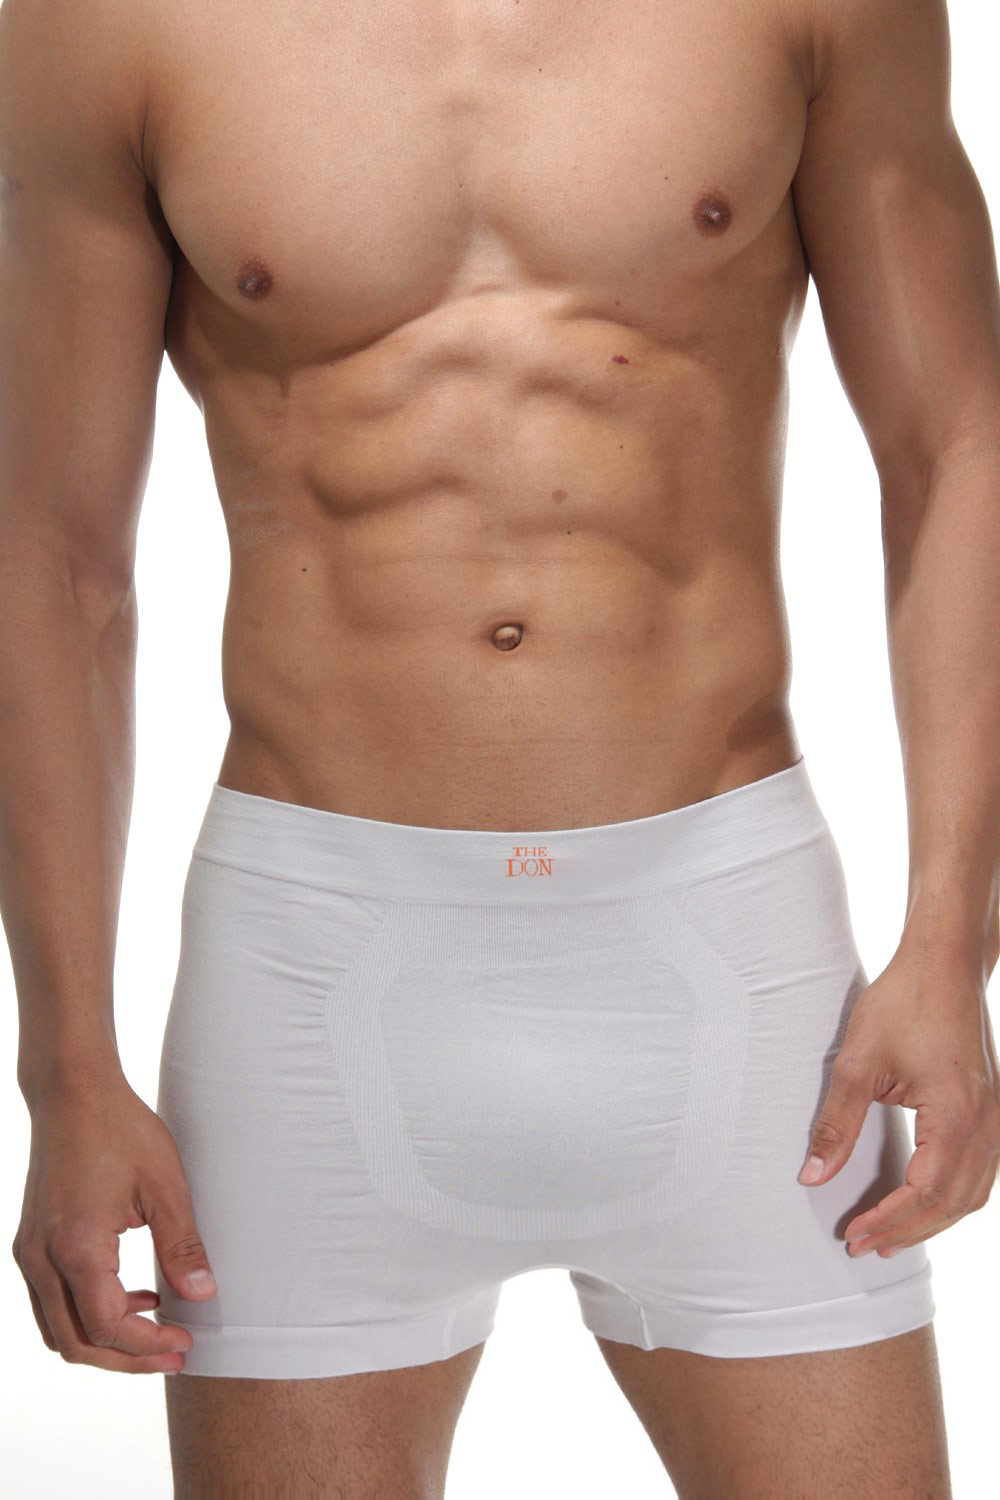 THE DON Seamless trunks at oboy.com